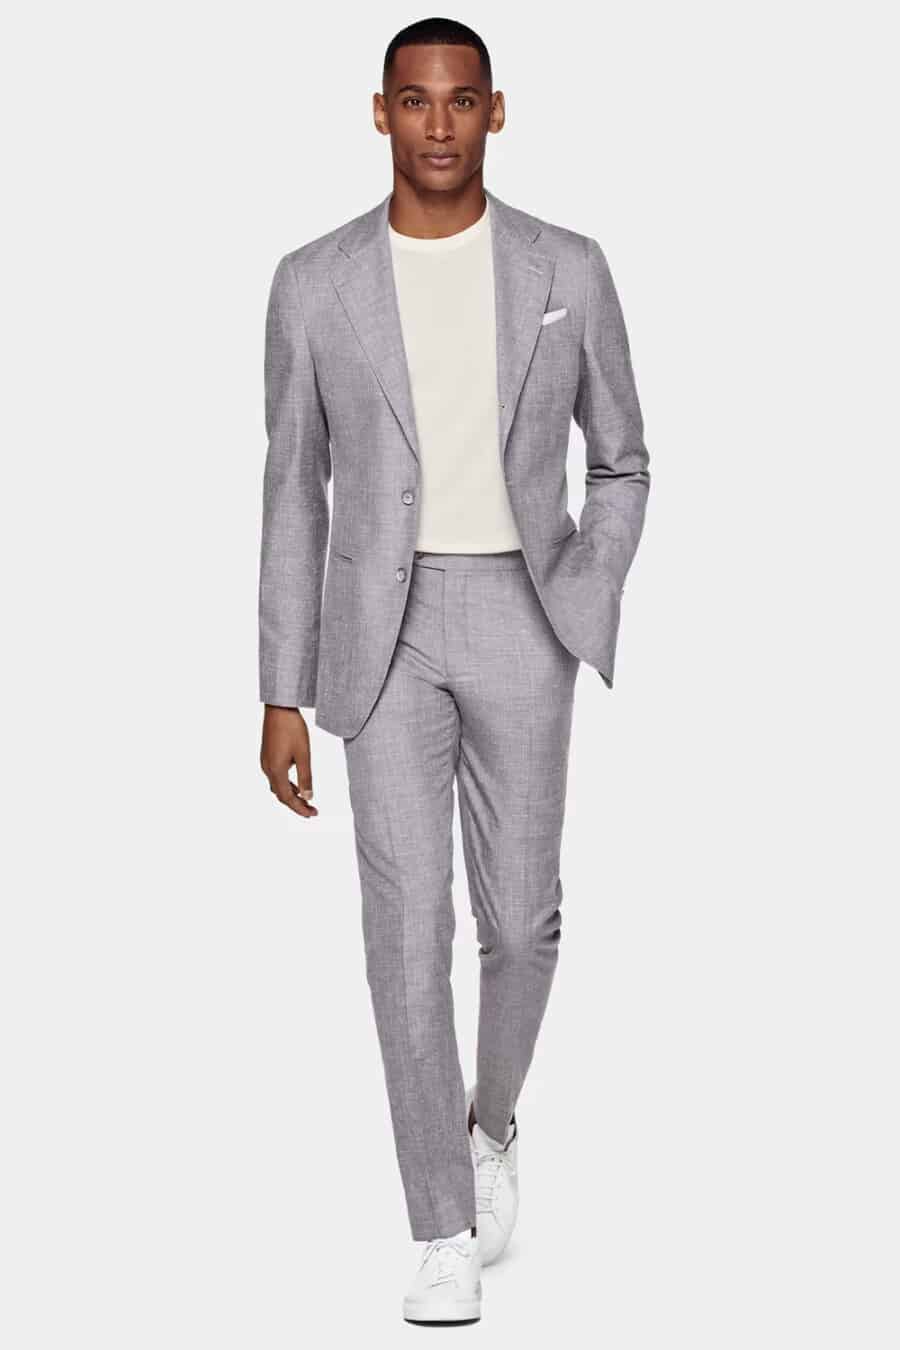 Men's purple suit, off-white T-shirt and white sneakers outfit